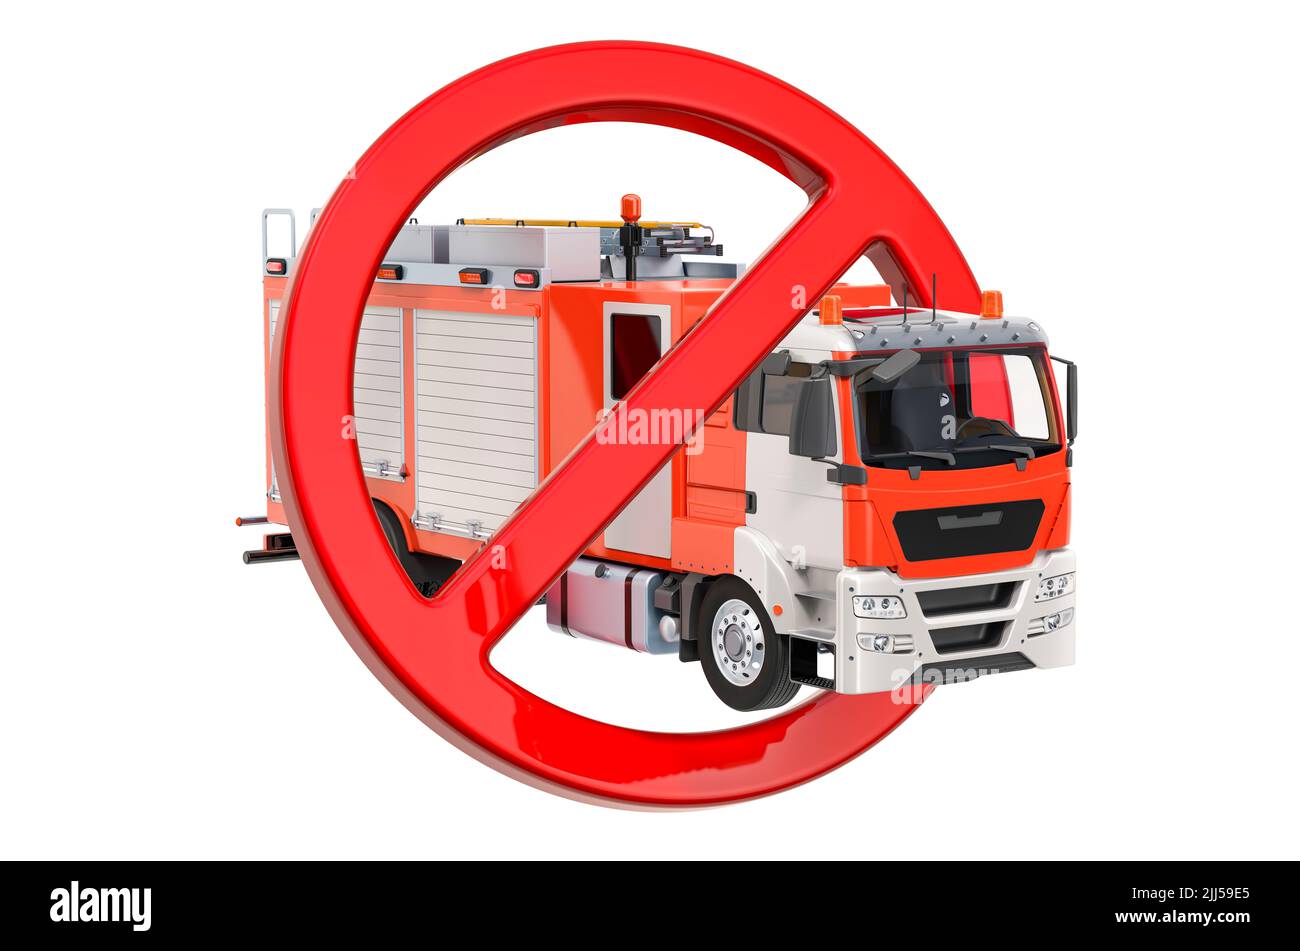 Forbidden sign with fire truck, 3D rendering isolated on white background Stock Photo